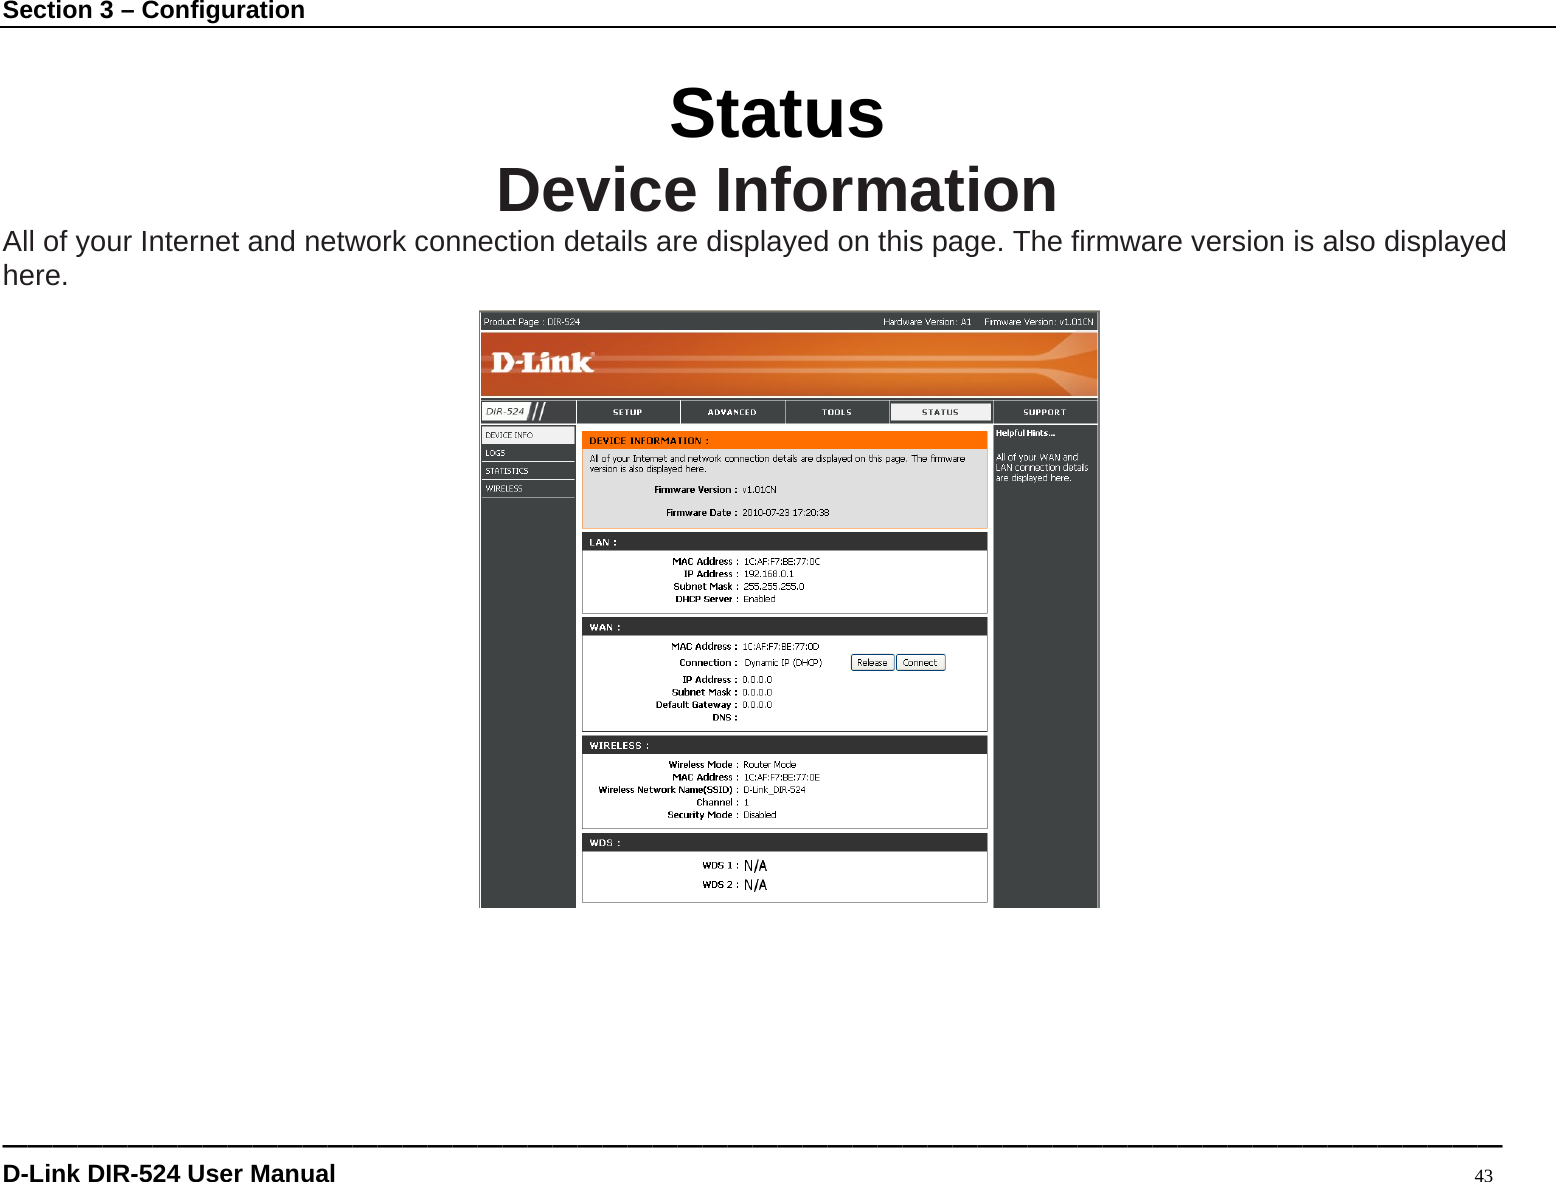 Section 3 – Configuration ———————————————————————————————————————————————————————————— D-Link DIR-524 User Manual                                                                                           43  Status Device Information All of your Internet and network connection details are displayed on this page. The firmware version is also displayed here.                    